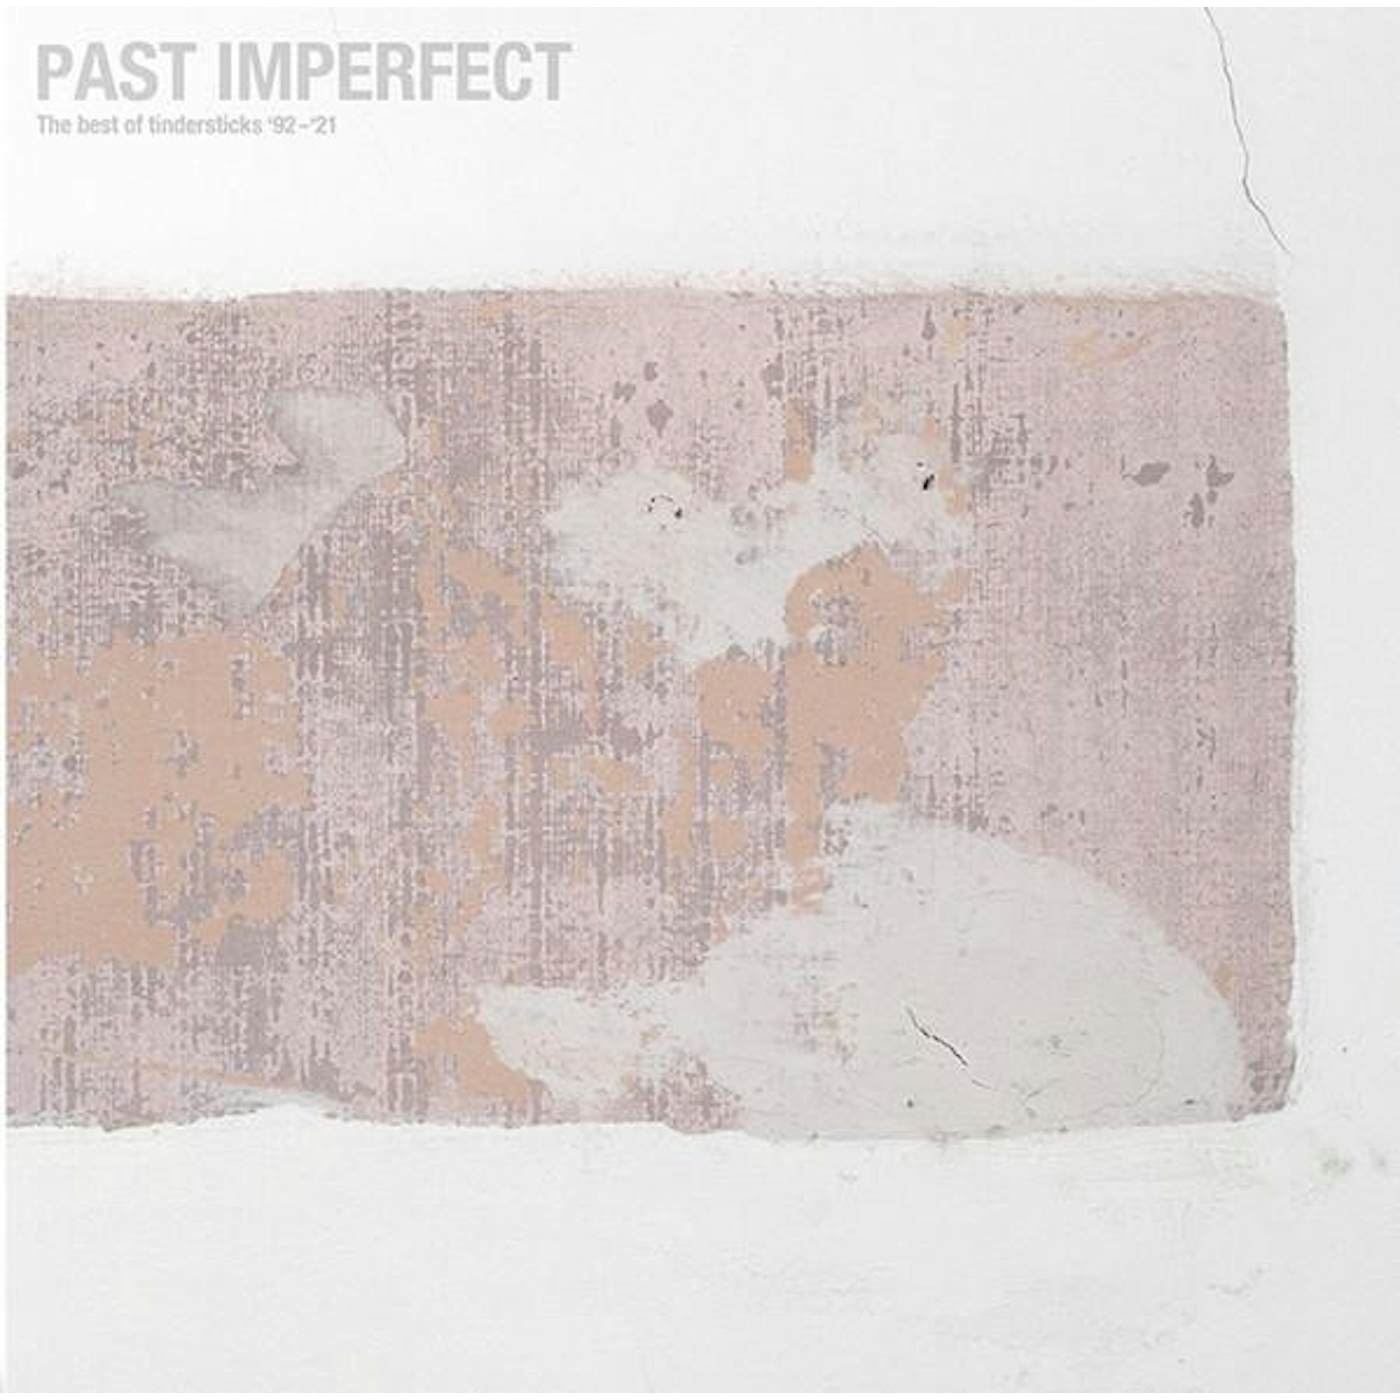 PAST IMPERFECT THE BEST OF TINDERSTICKS ’92 - ’21 (3CD) CD